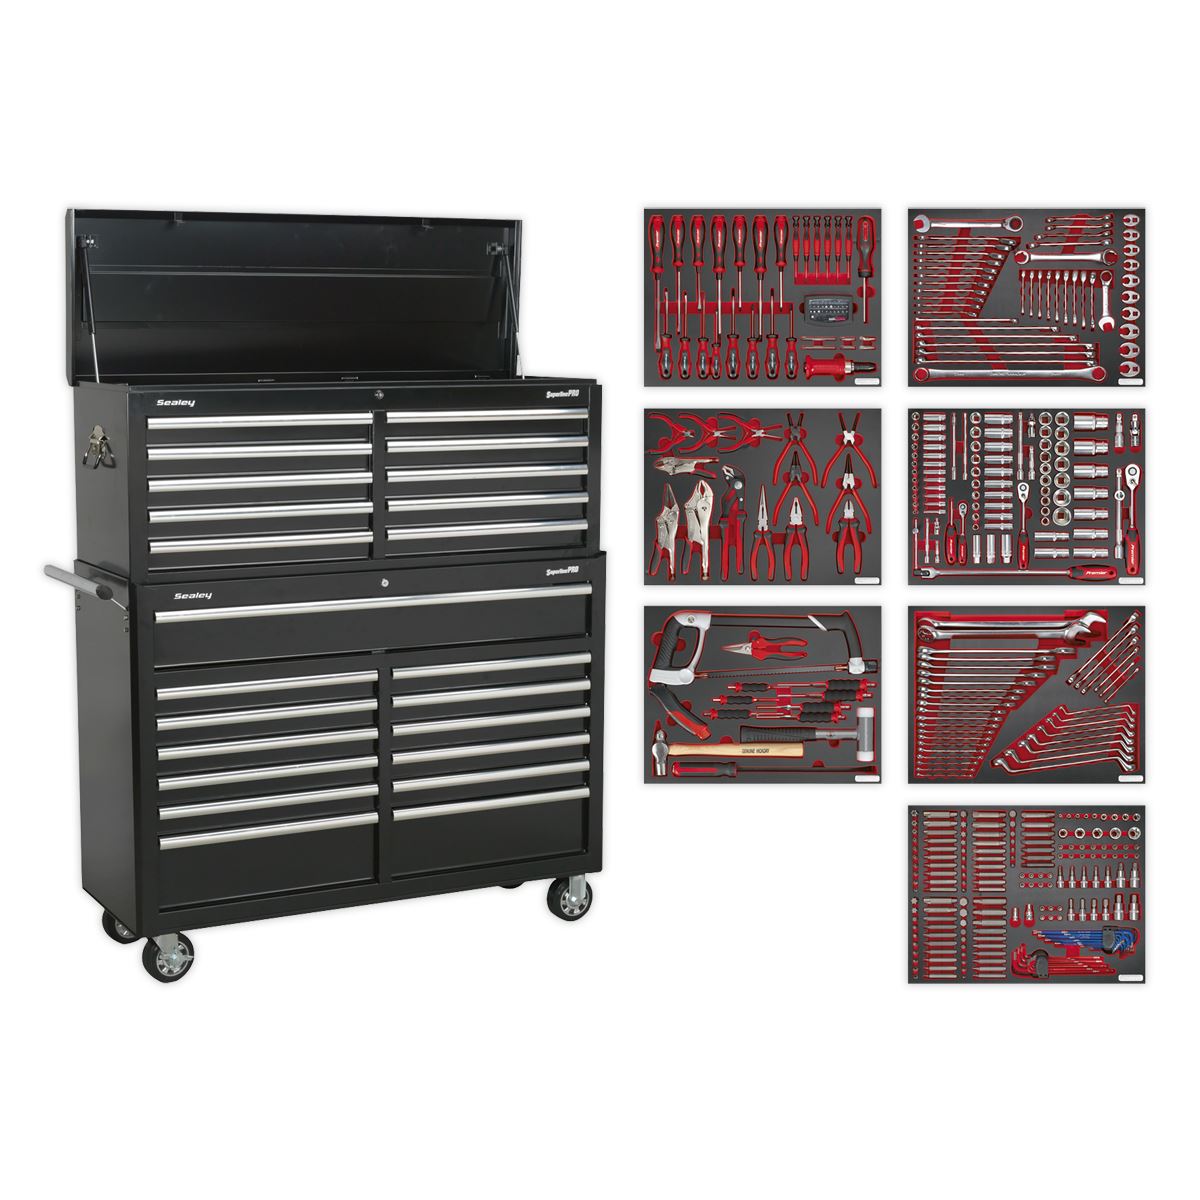 Sealey Superline Pro Tool Chest Combination 23 Drawer with Ball-Bearing Slides - Black with 446pc Tool Kit